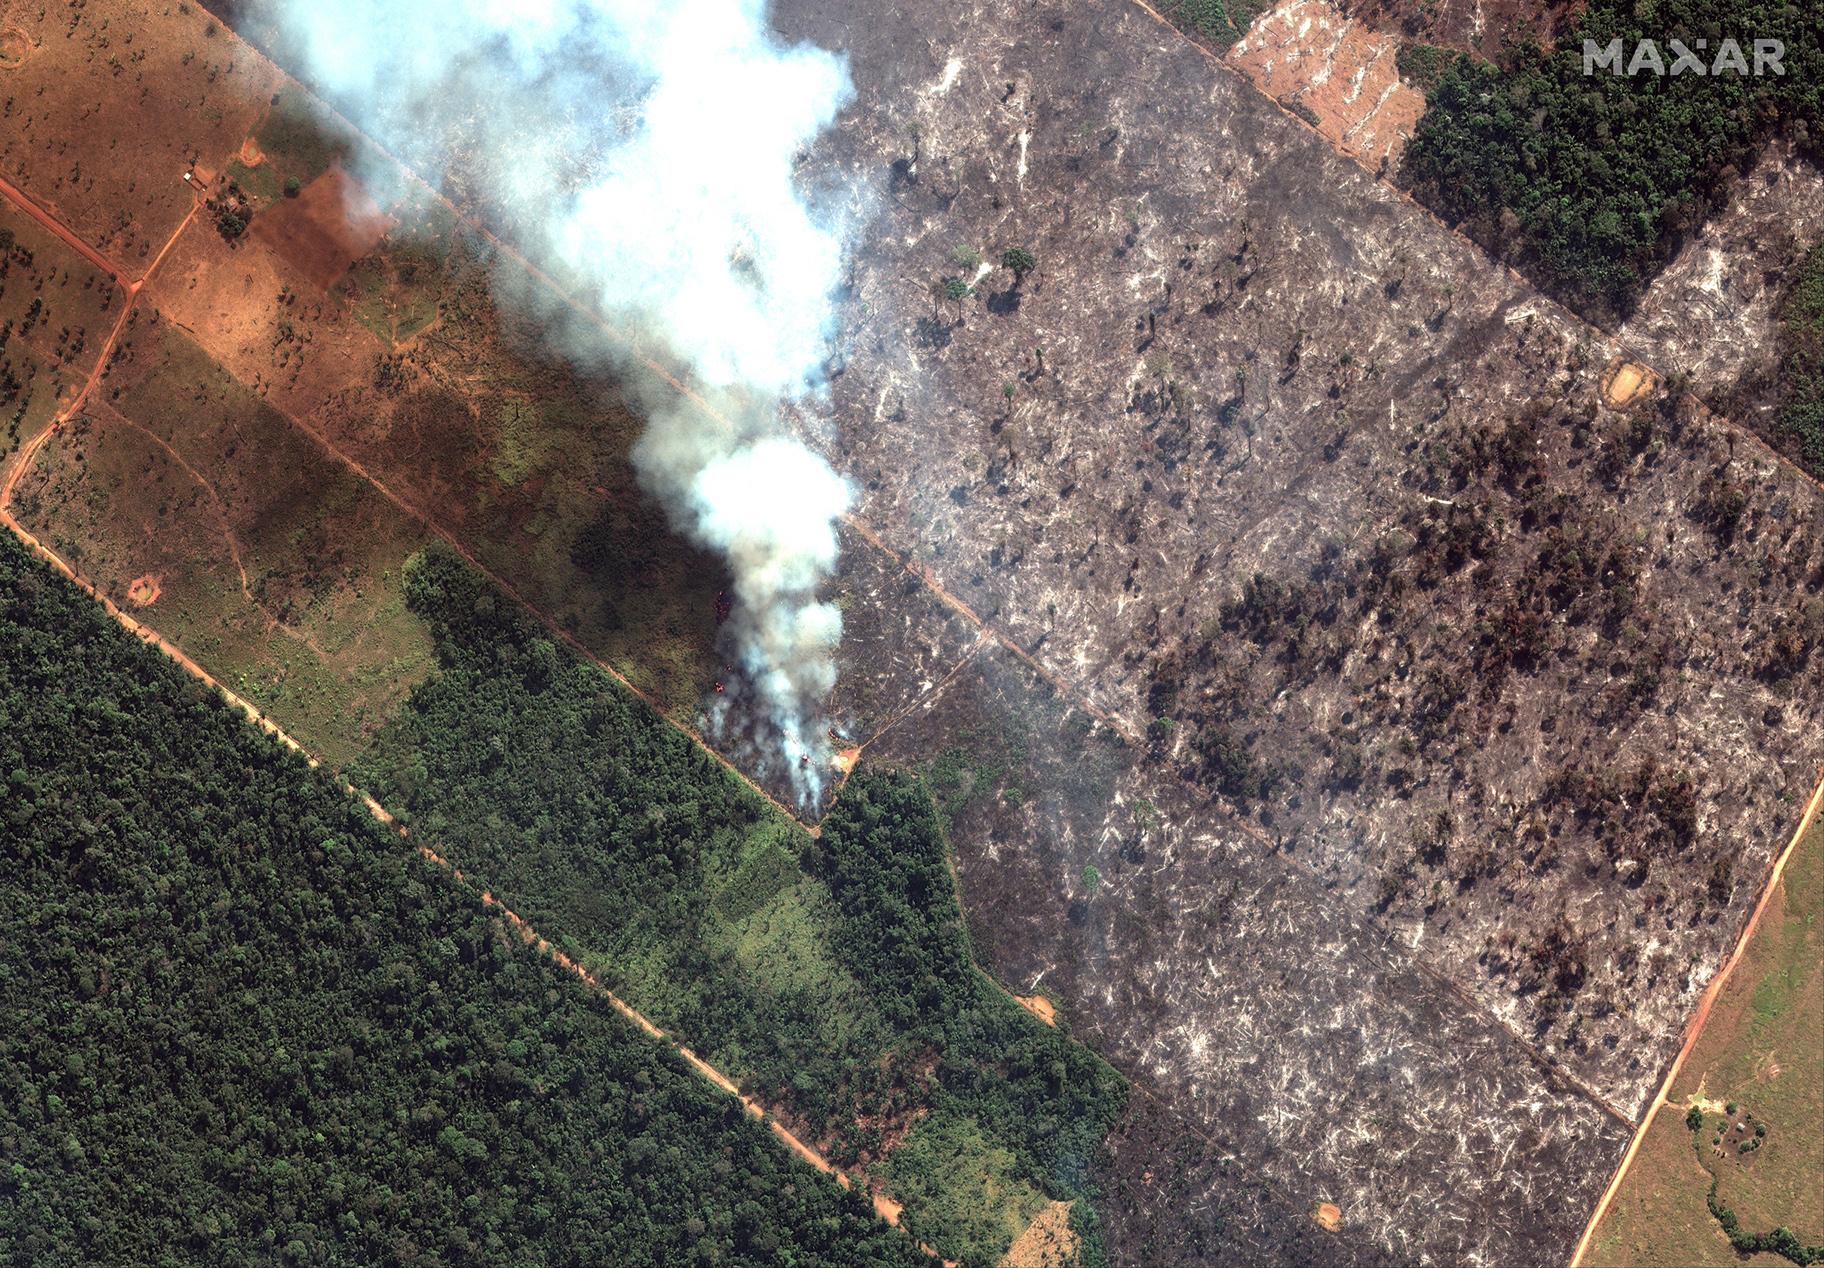 This Aug. 15, 2019 satellite image from Maxar Technologies shows a close-up view of a fire southwest of Porto Velho Brazil. Brazil's National Institute for Space Research, a federal agency monitoring deforestation and wildfires, said the country has seen a record number of wildfires this year as of Tuesday, Aug. 20. (Satellite image ©2019 Maxar Technologies via AP)